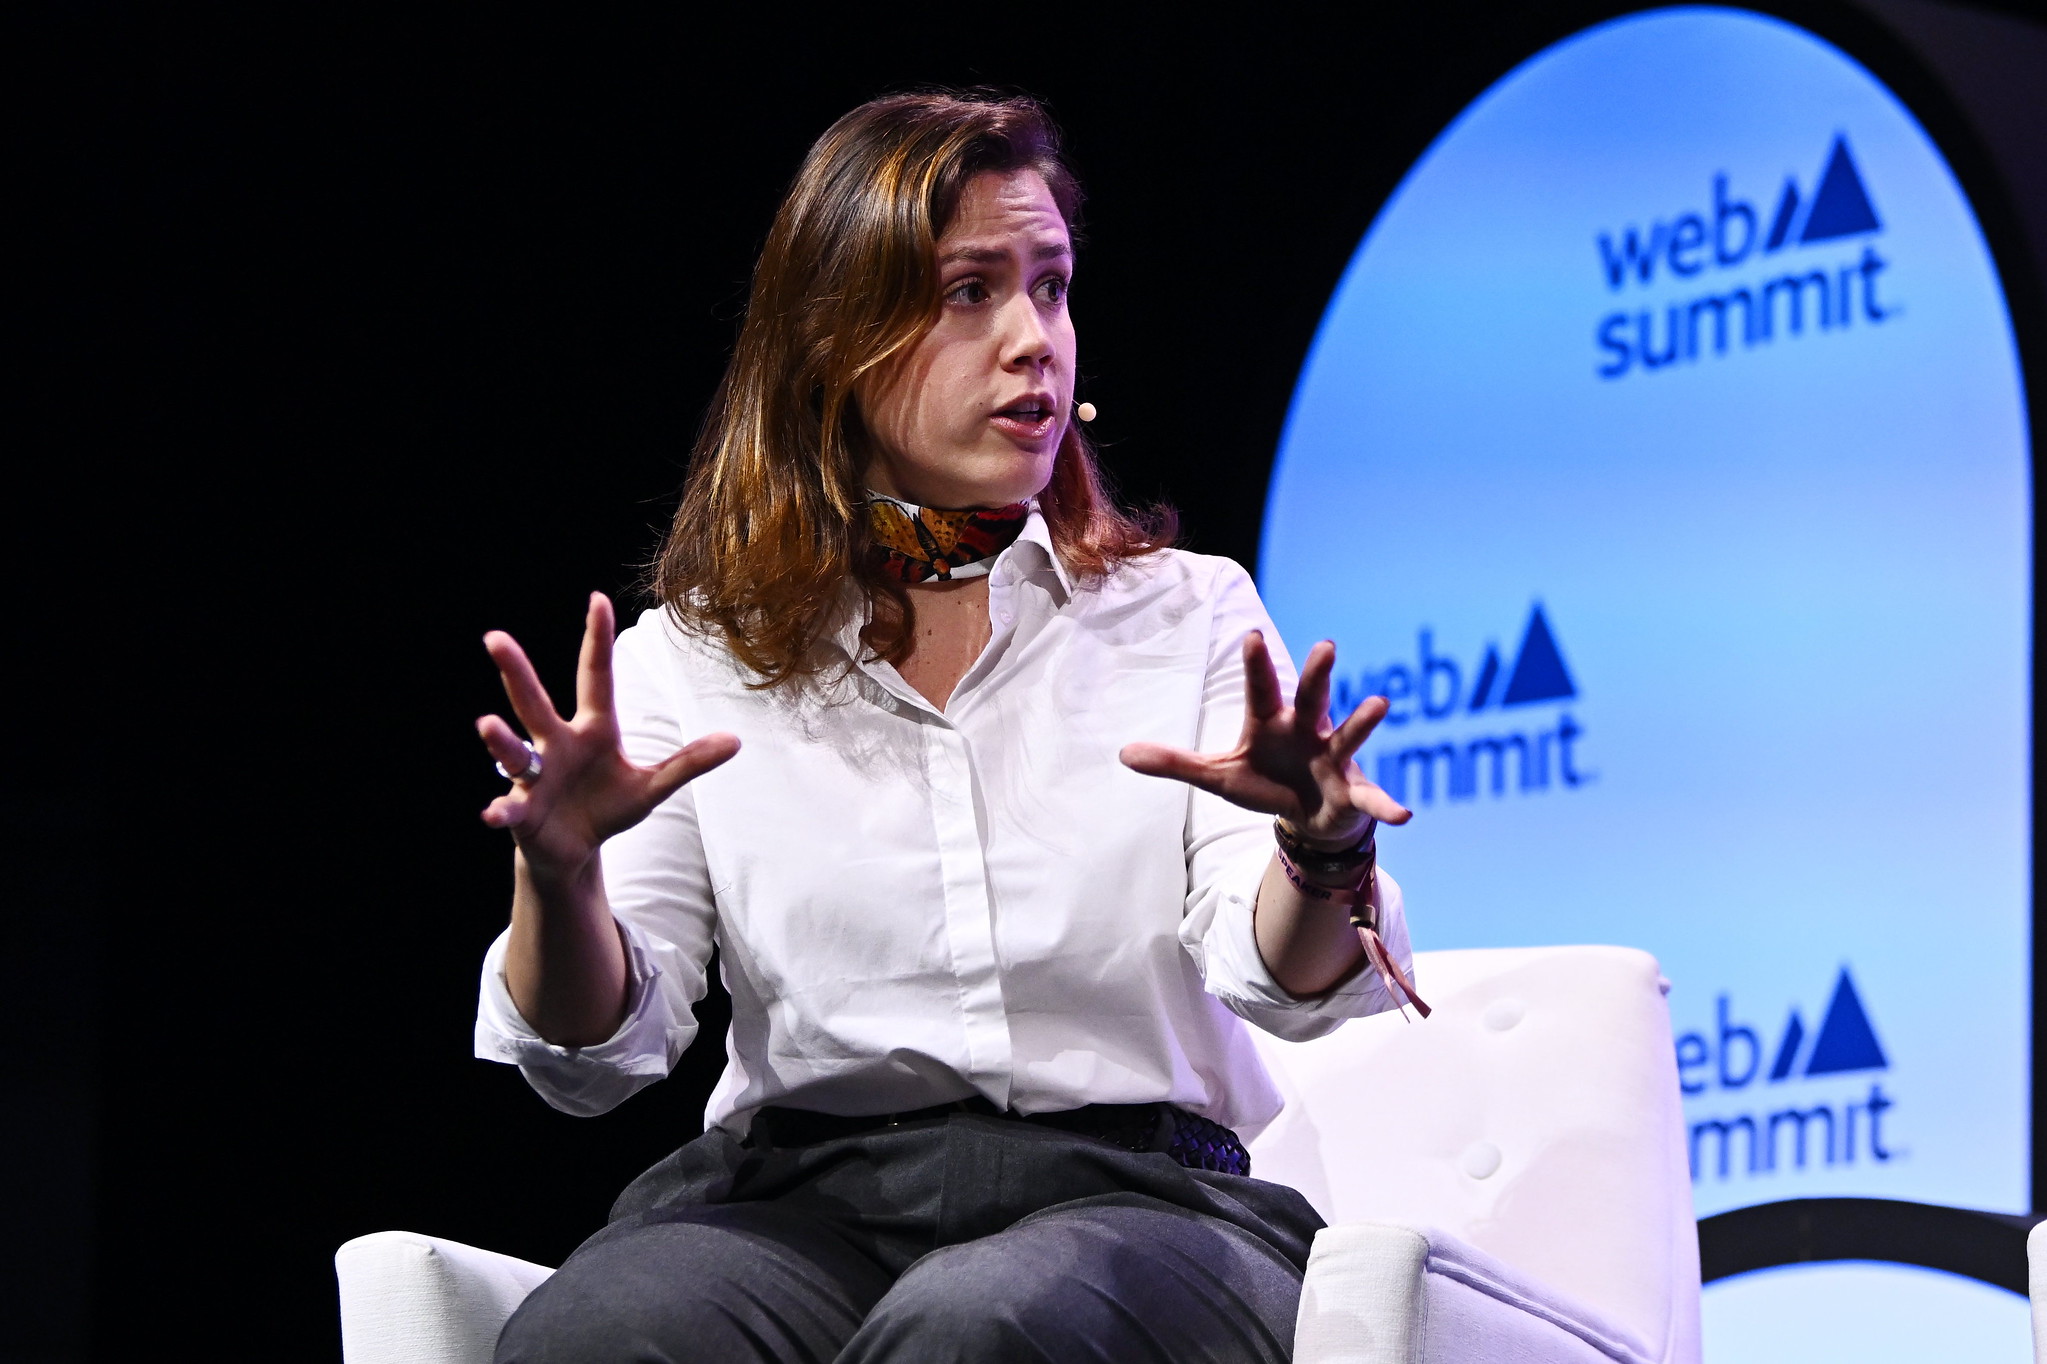 Photograph of Lidia Pereira, member of the European parliament, speaking on stage at Web Summit. Lidia is sitting on a chair and using hands to gesture emphatically while speaking. Lidia is wearing an on-ear microphone and appears to be speaking to another person.